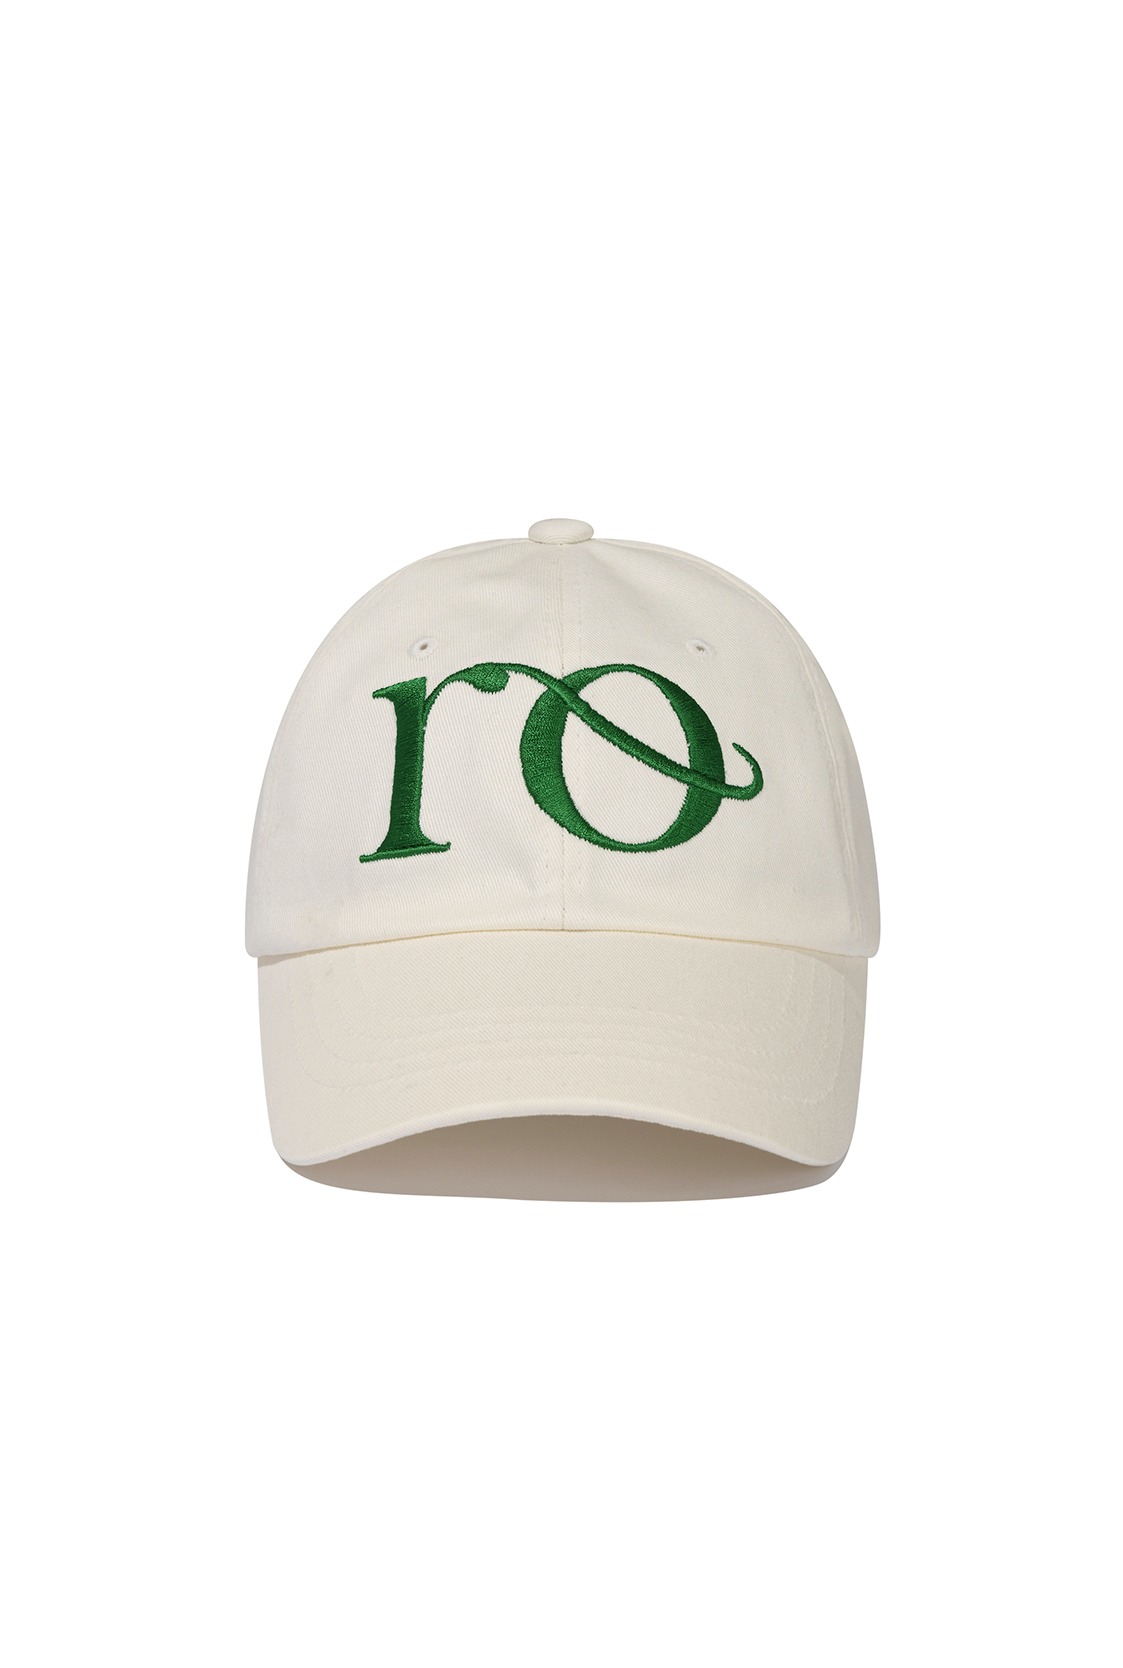 R RO EMBROIDERY BALL CAP_IVORY